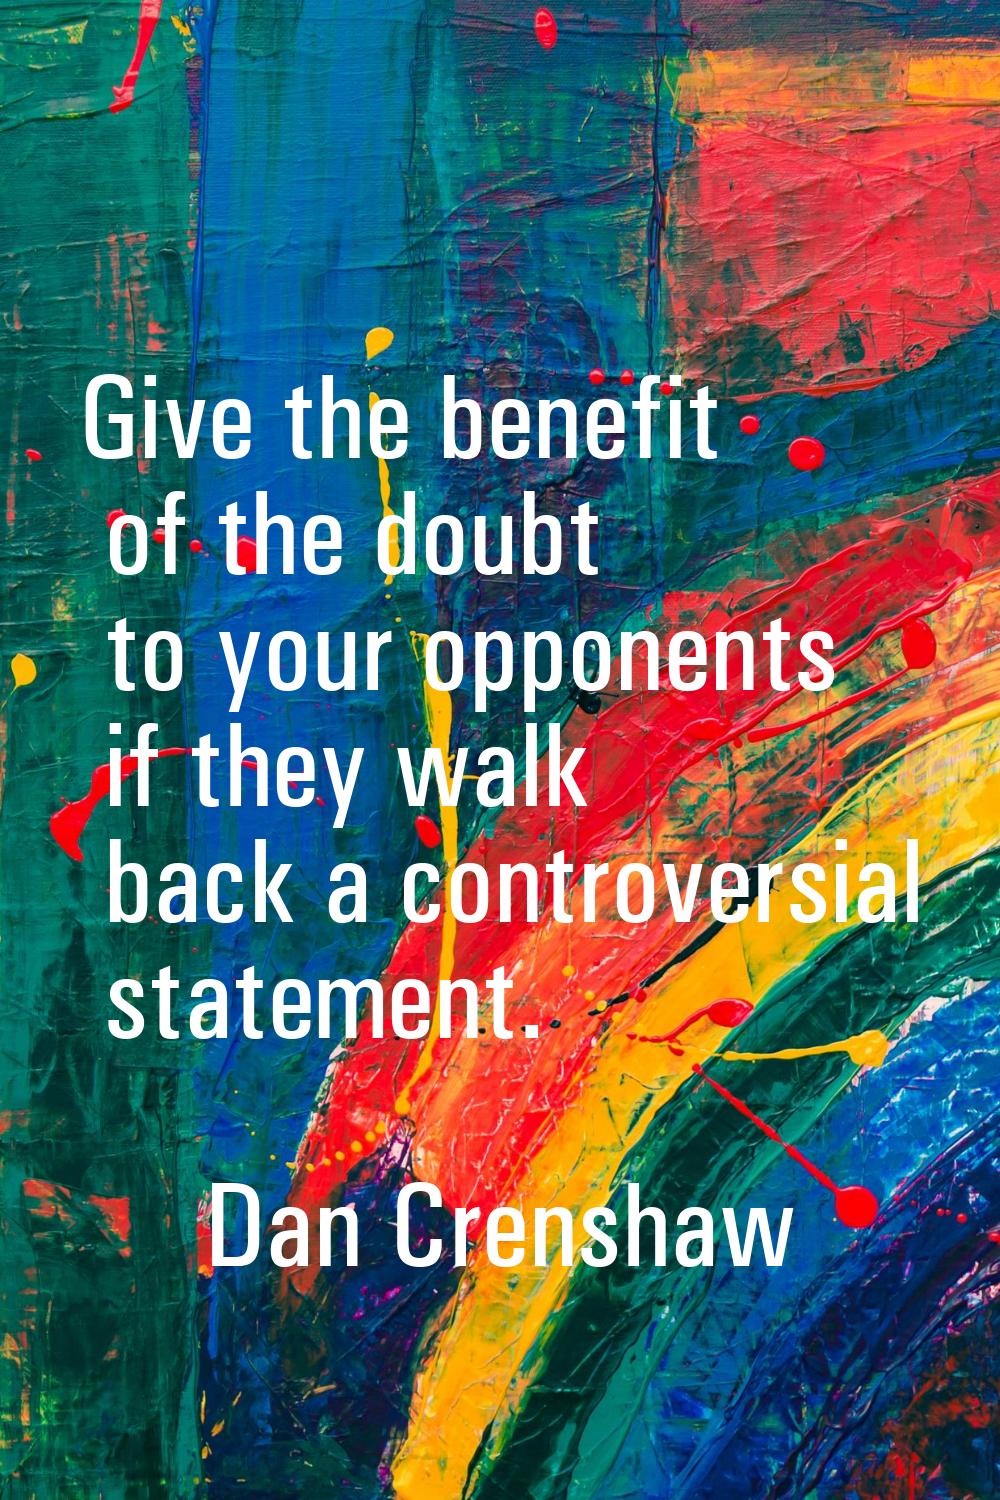 Give the benefit of the doubt to your opponents if they walk back a controversial statement.